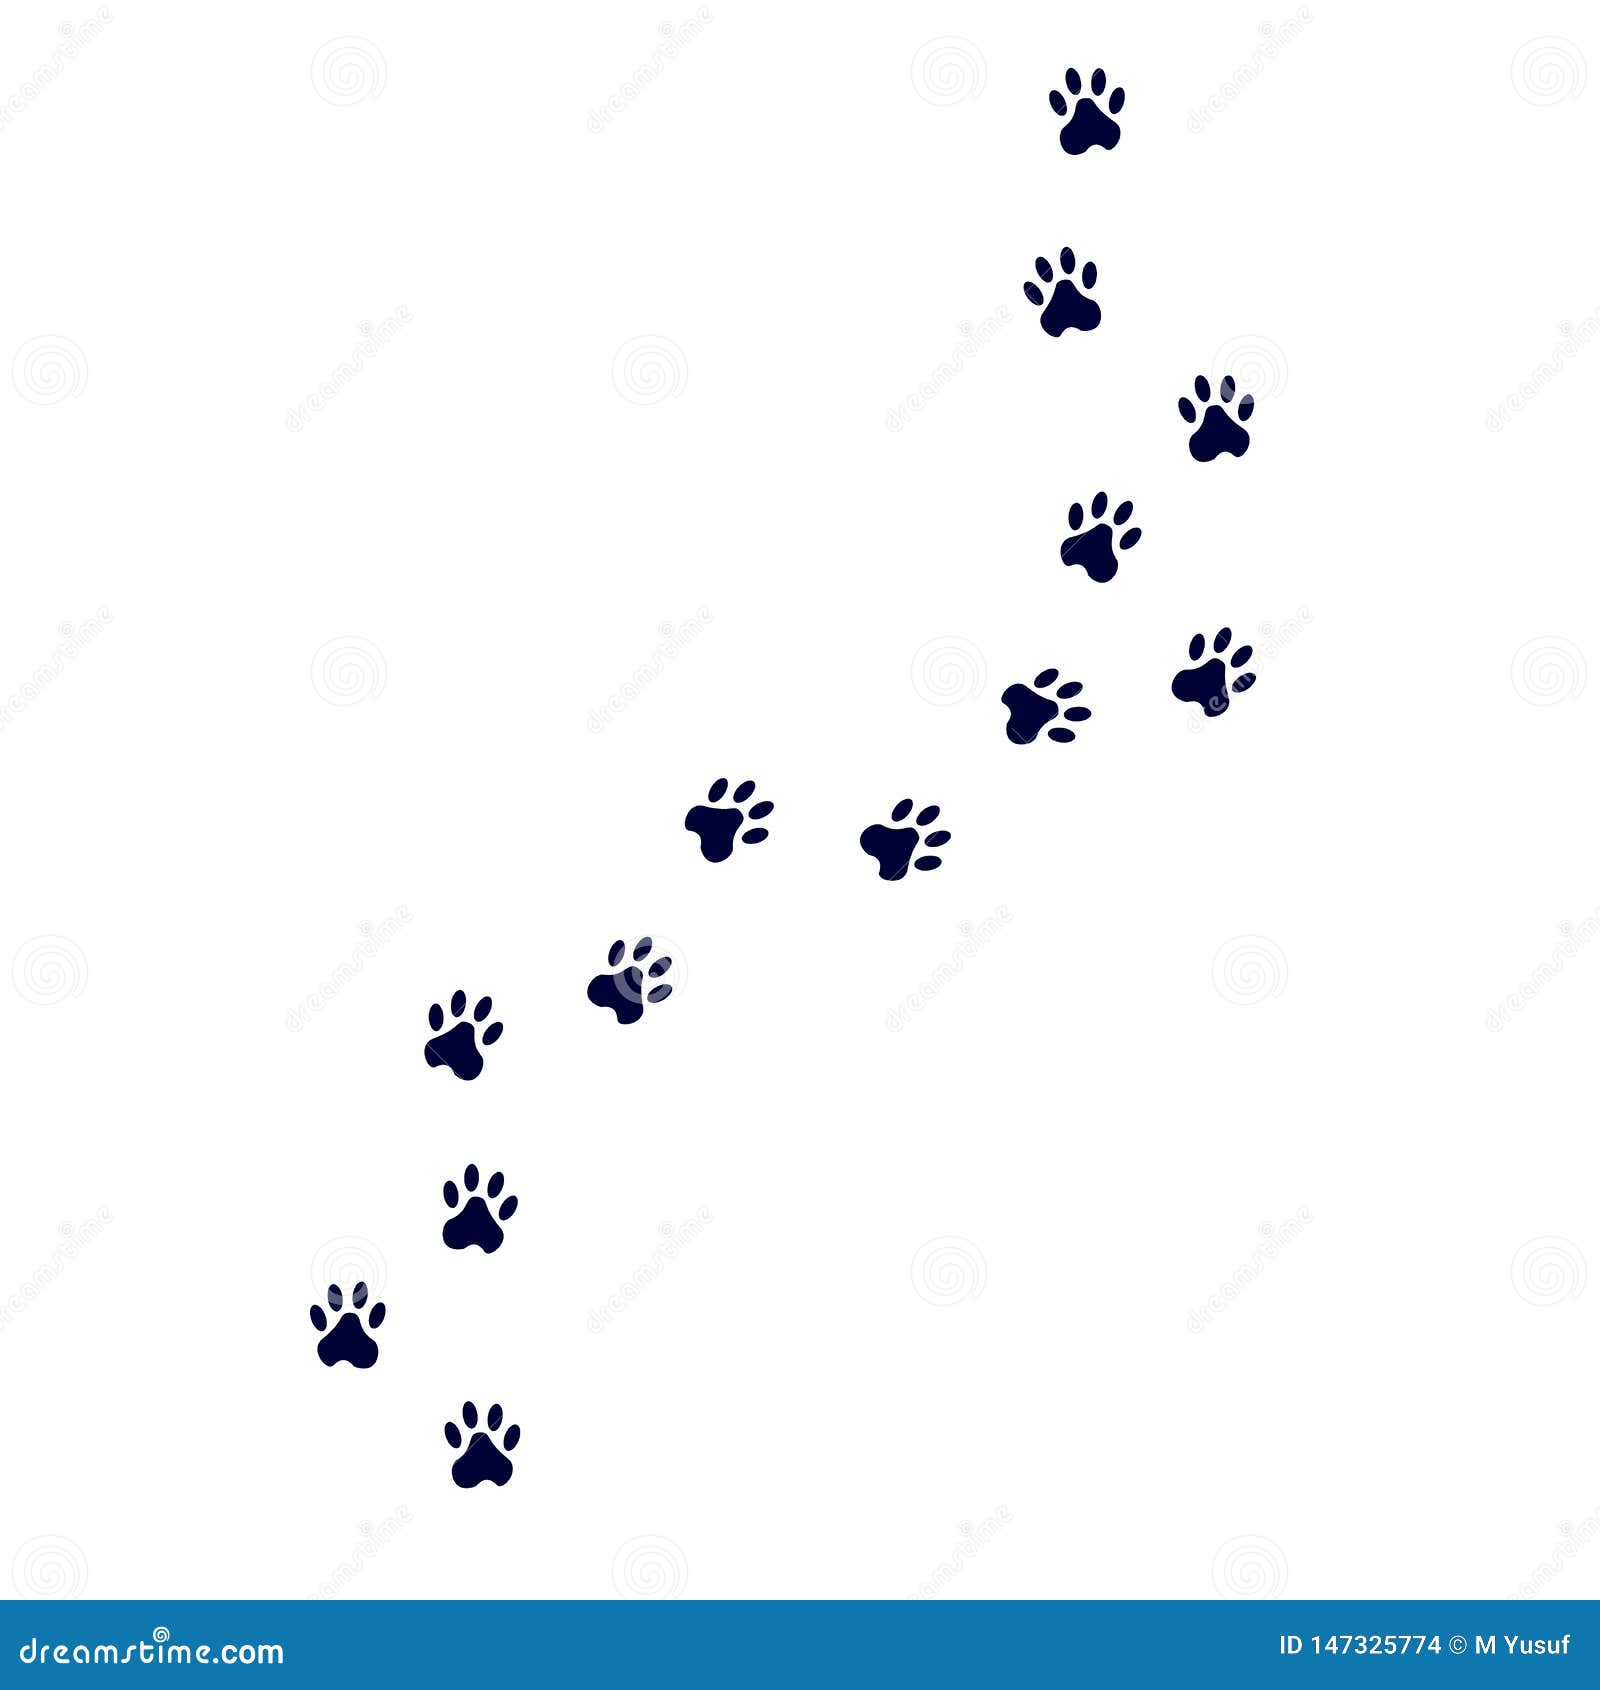 Paw Vector Foot Trail Print Of Cat. Stock Illustration ...